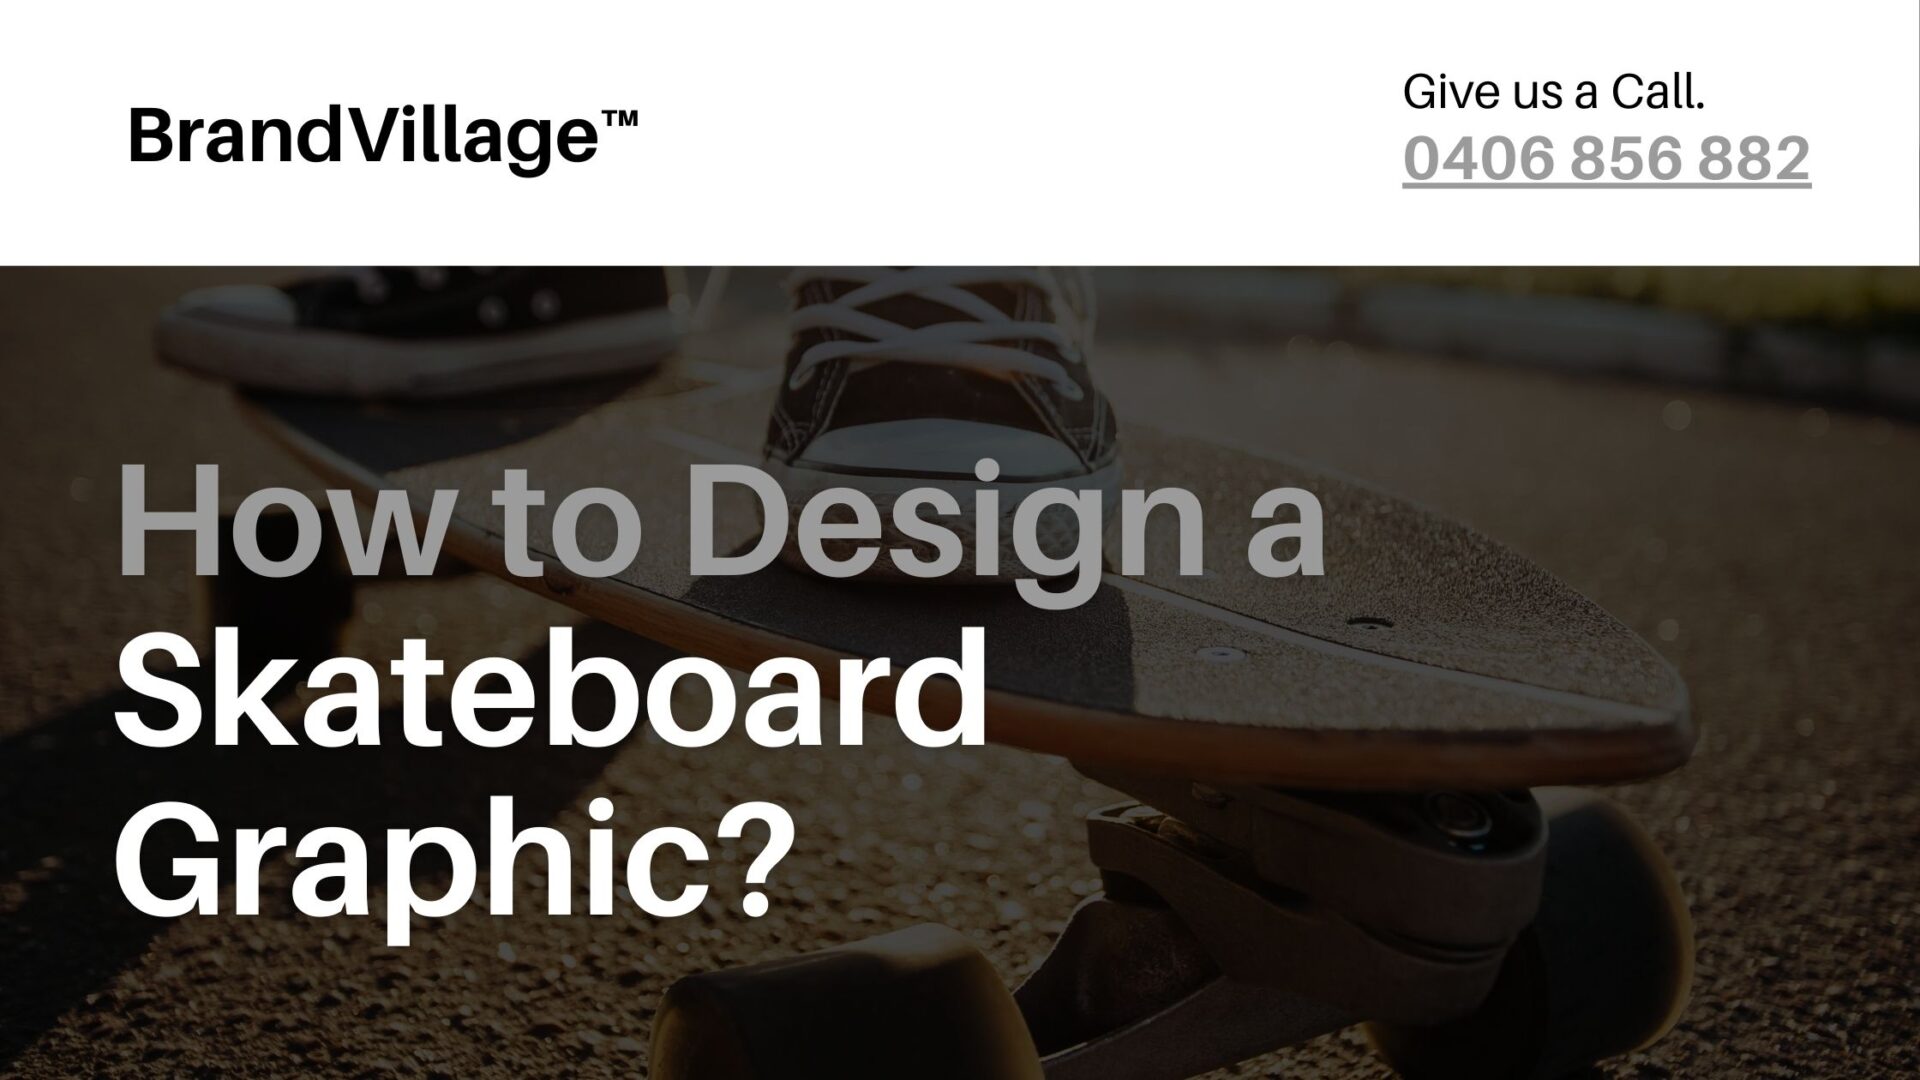 How to Design a Skateboard Graphic?